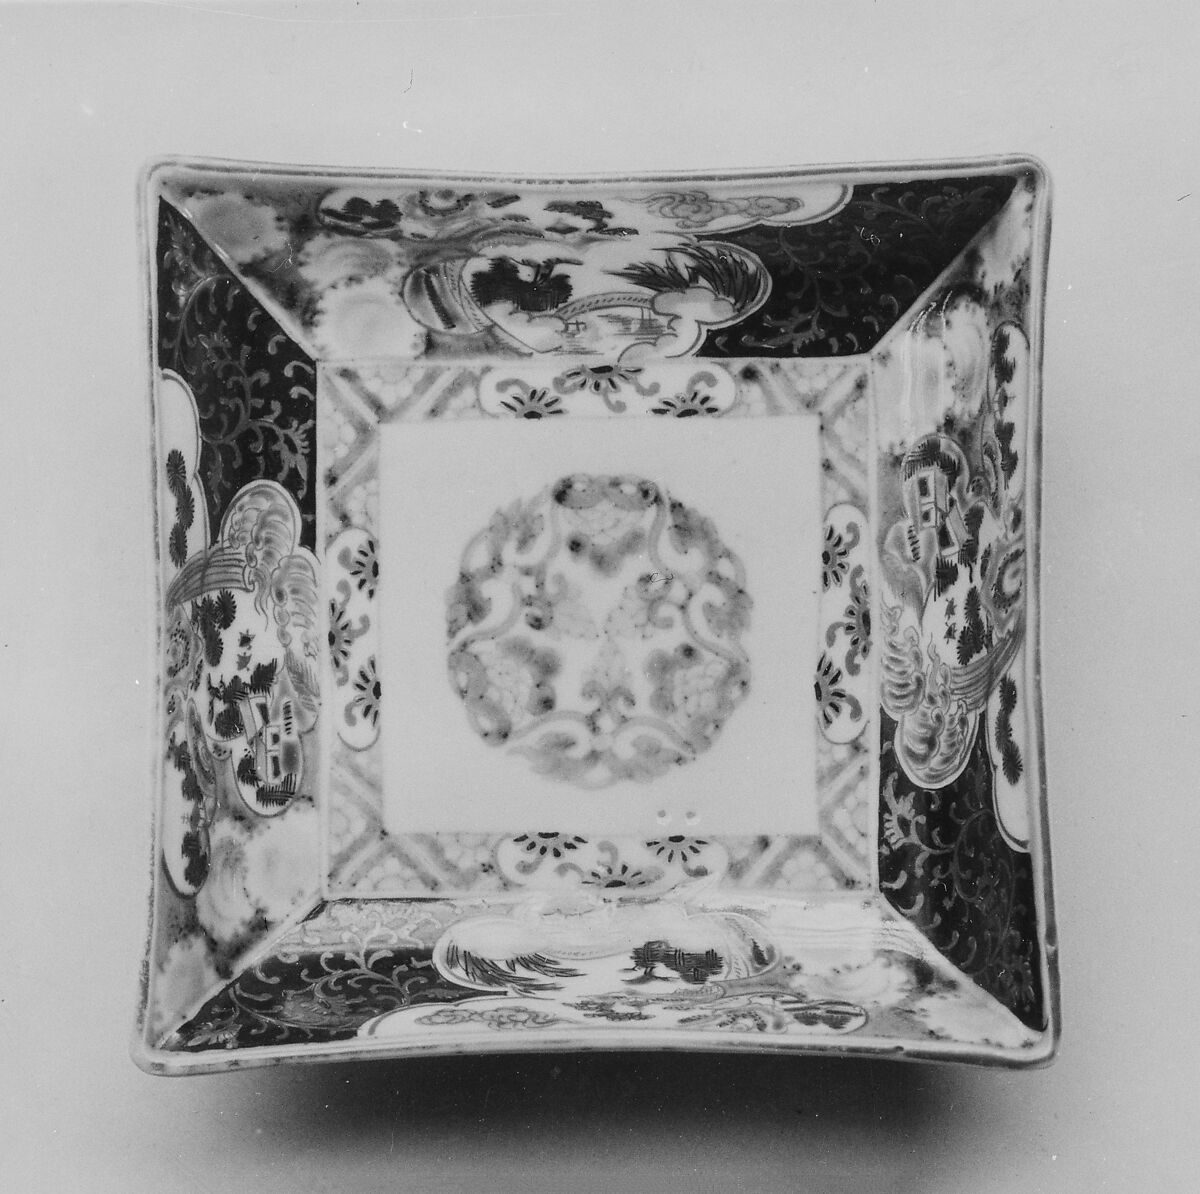 Square Dish, Porcelain decorated with blue under the glaze and colored enamels (Imari ware), Japan 